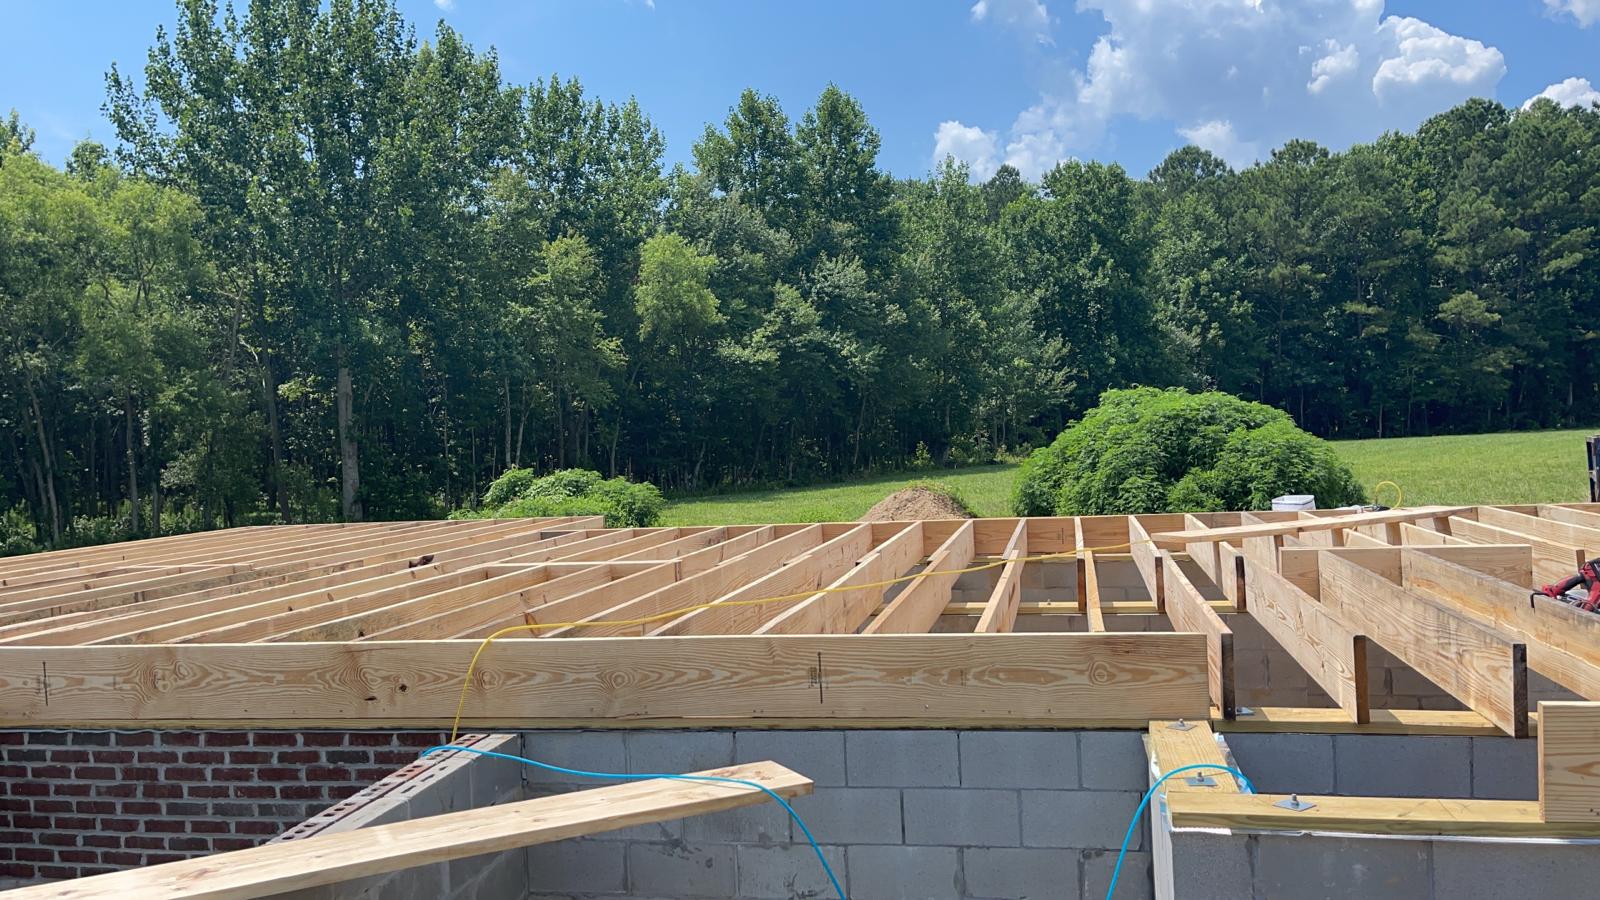 Wood framing on the foundation for a custom home in Princess Anne, MD